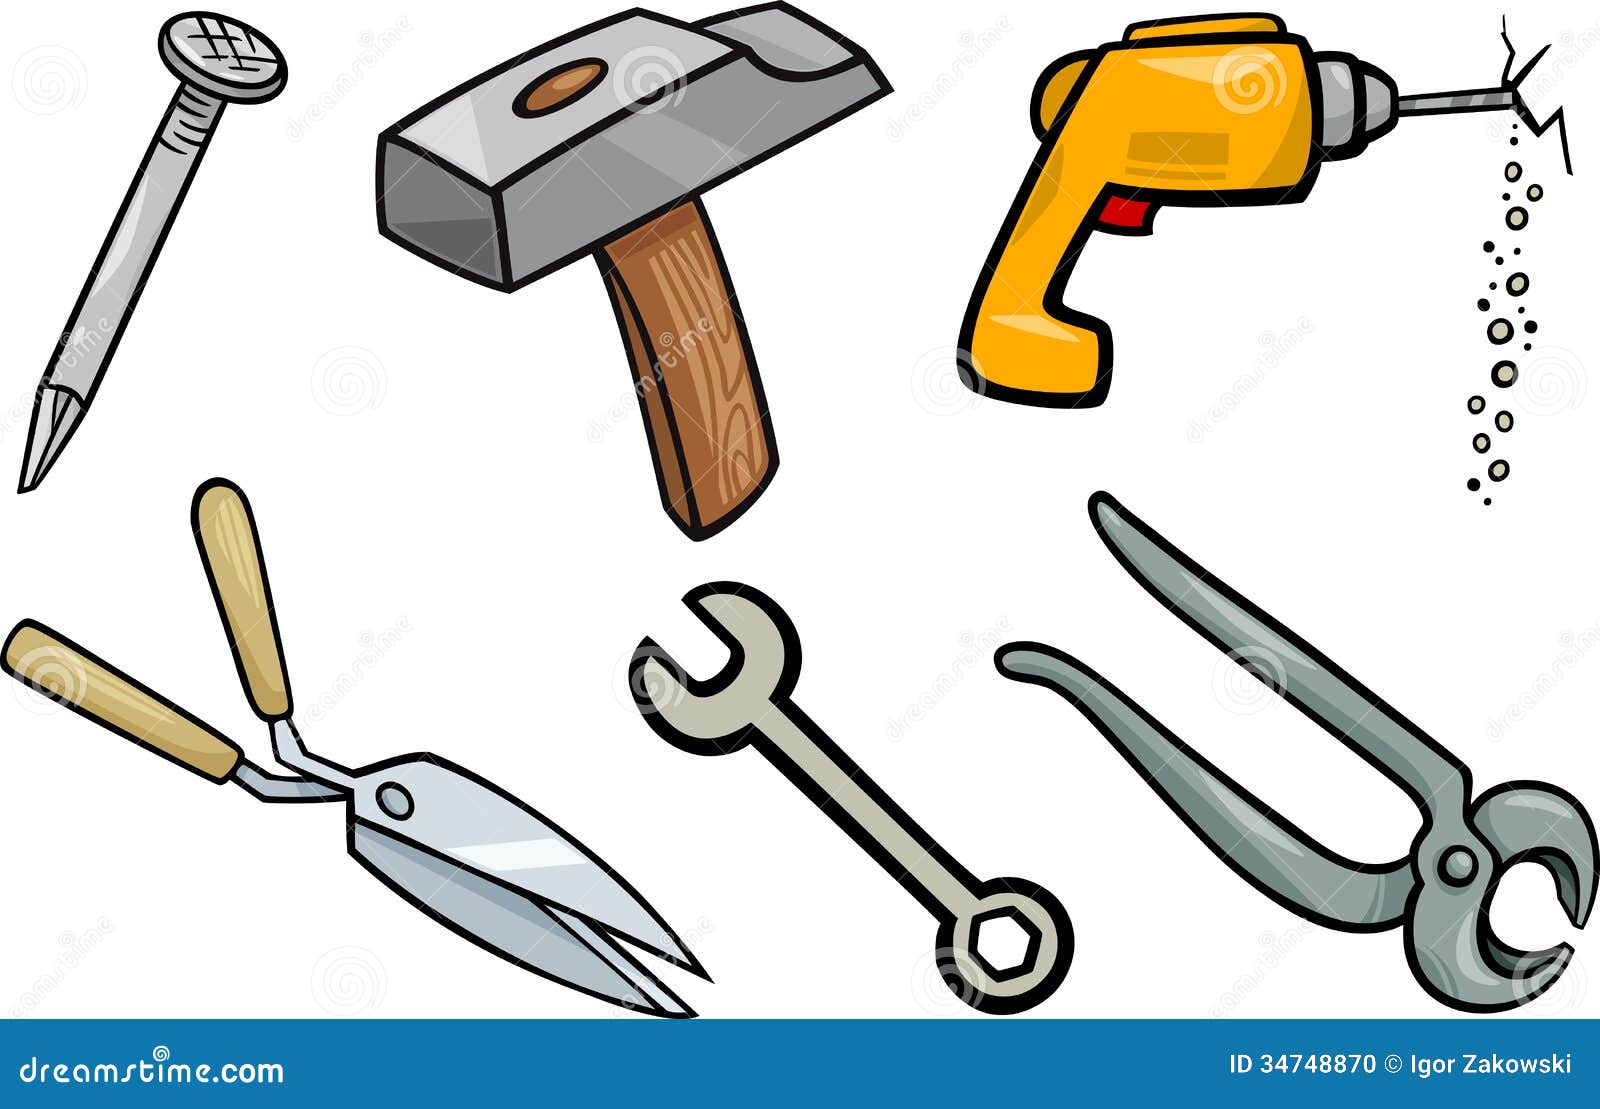 clipart of objects - photo #50